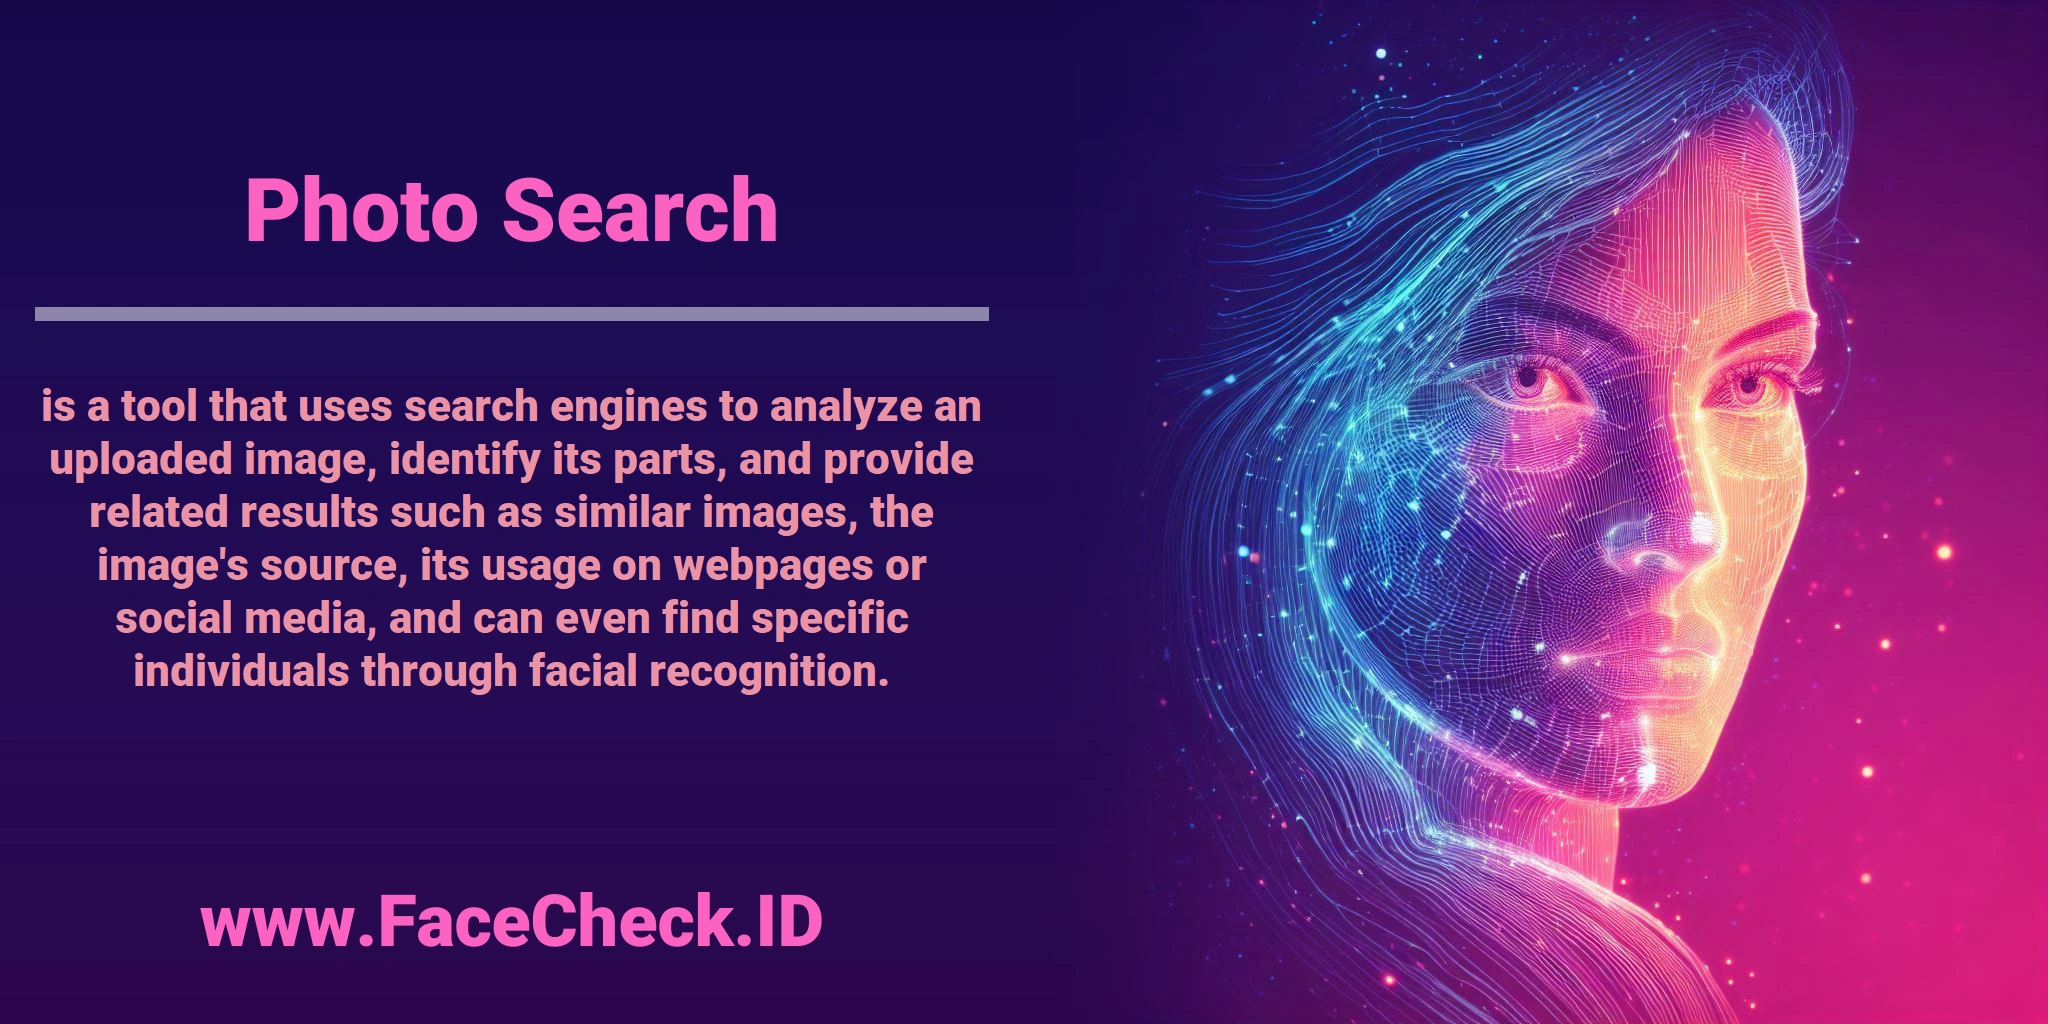 <b>Photo Search</b> is a tool that uses search engines to analyze an uploaded image, identify its parts, and provide related results such as similar images, the image's source, its usage on webpages or social media, and can even find specific individuals through facial recognition.